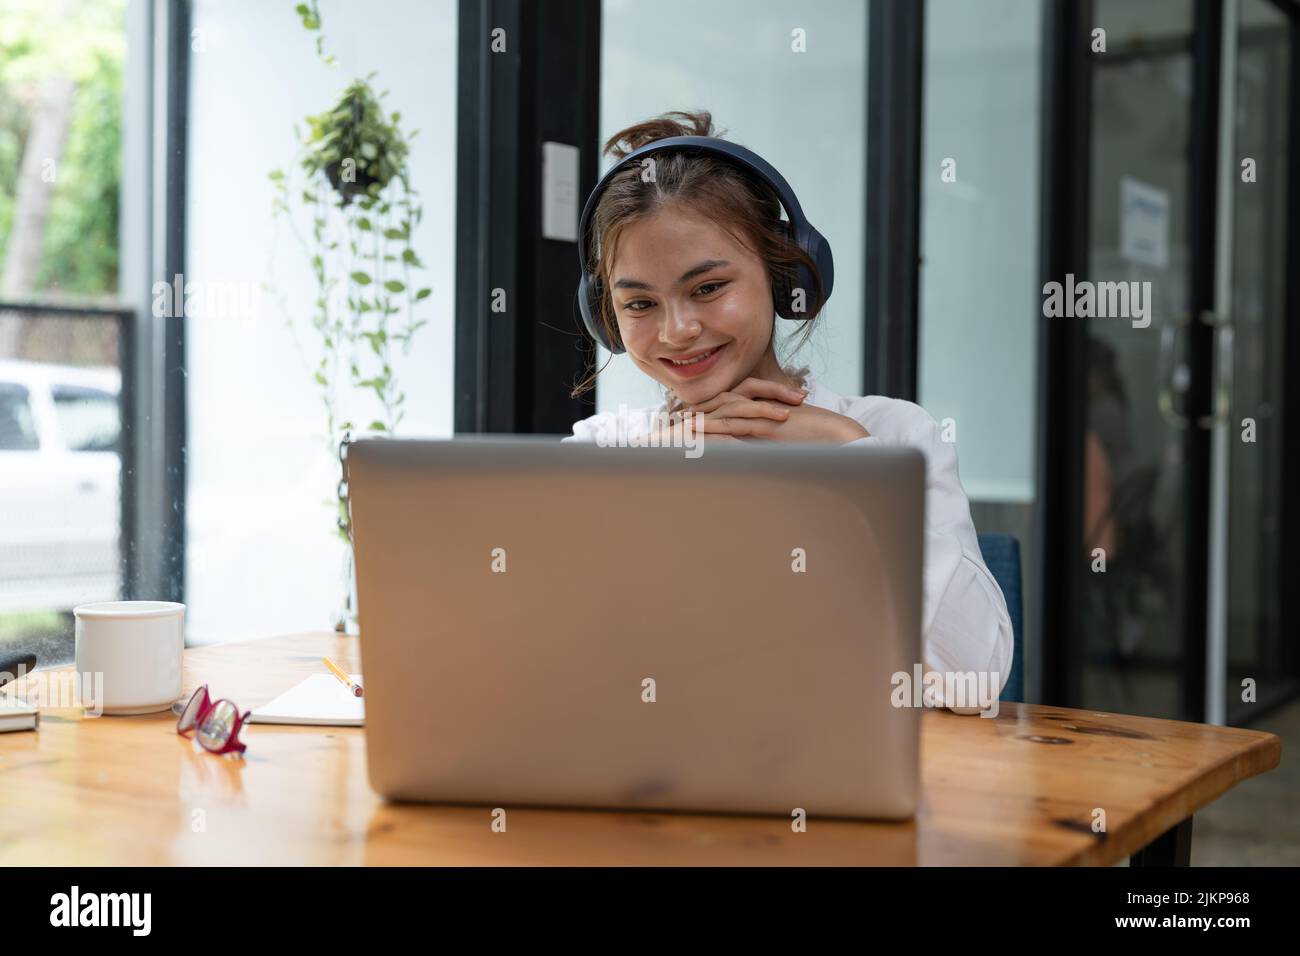 Online education, e-learning. young woman studying remotely, using a laptop, listening to online webinar at home Stock Photo